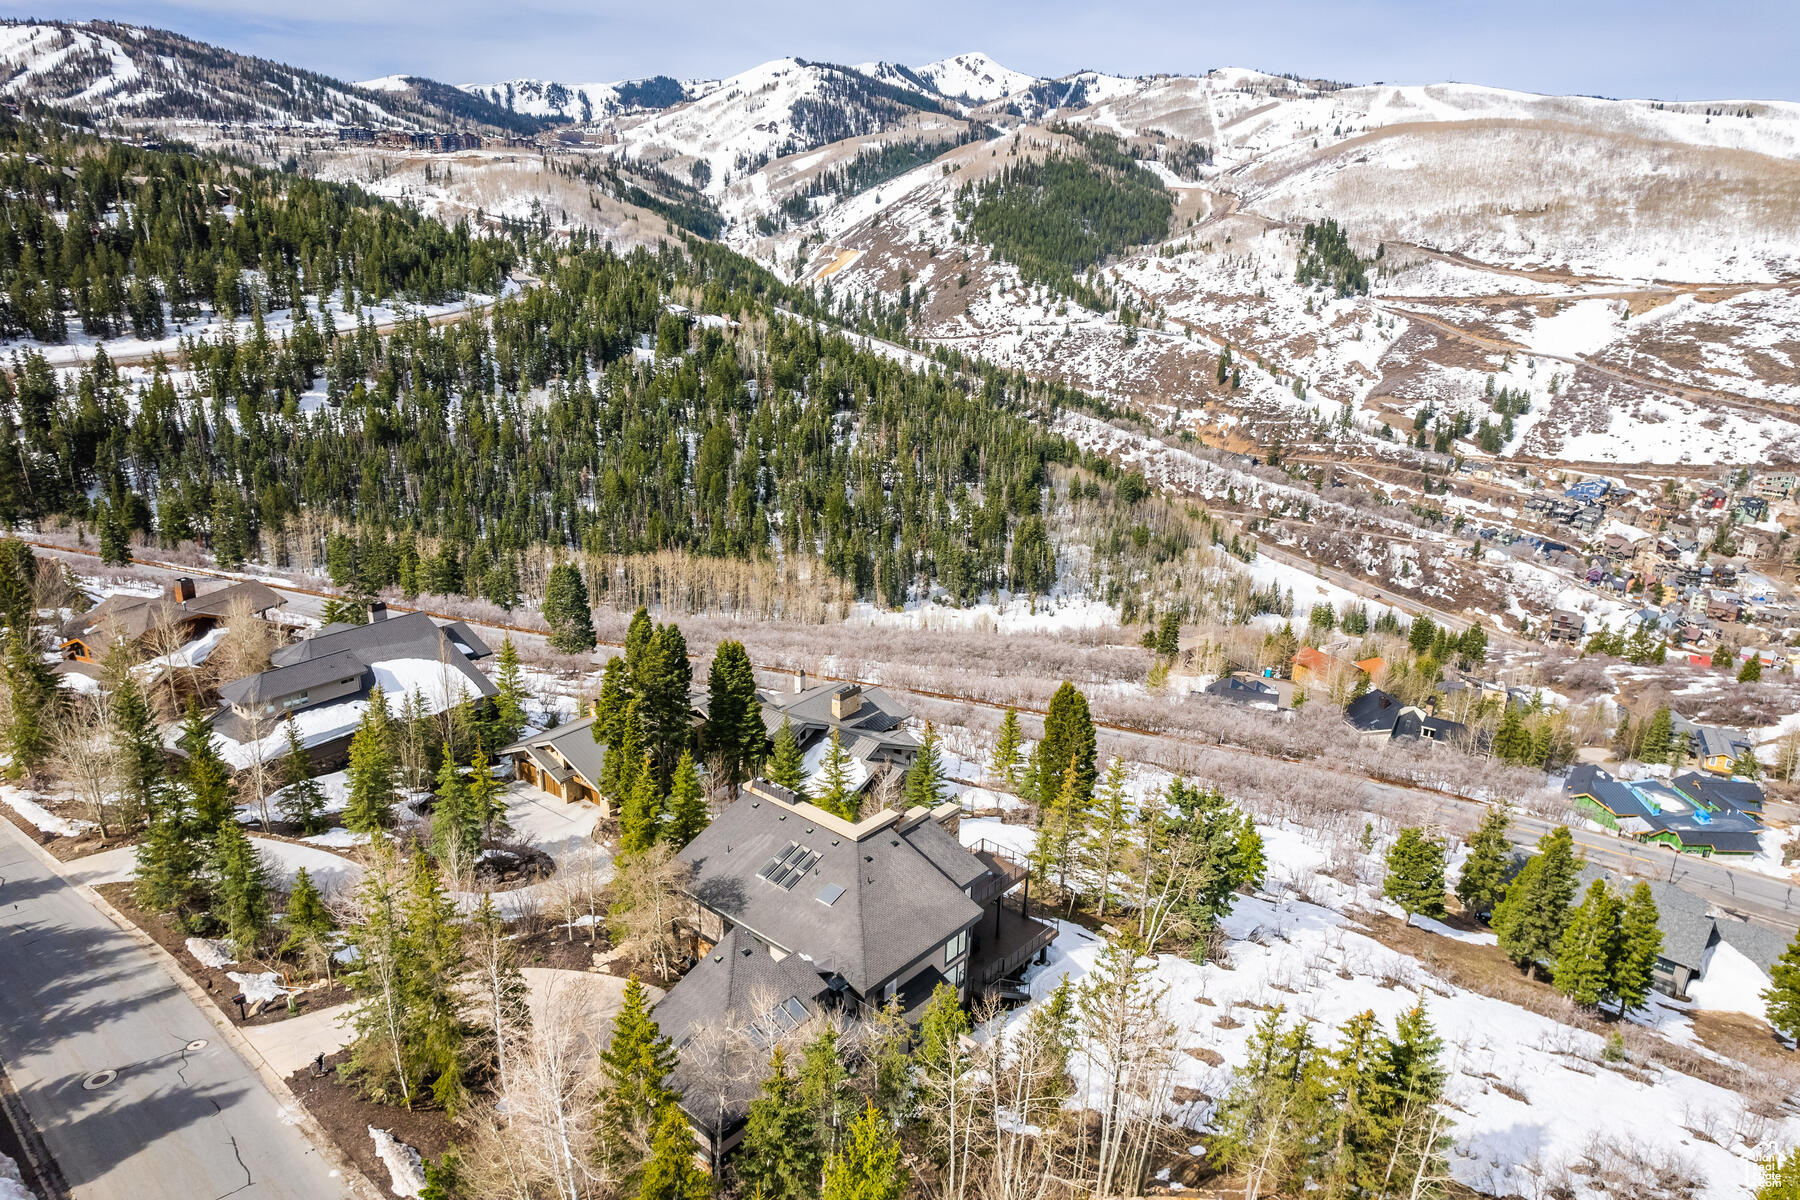 394 CENTENNIAL, Park City, Utah 84060, 5 Bedrooms Bedrooms, 21 Rooms Rooms,2 BathroomsBathrooms,Residential Lease,For sale,CENTENNIAL,1994647